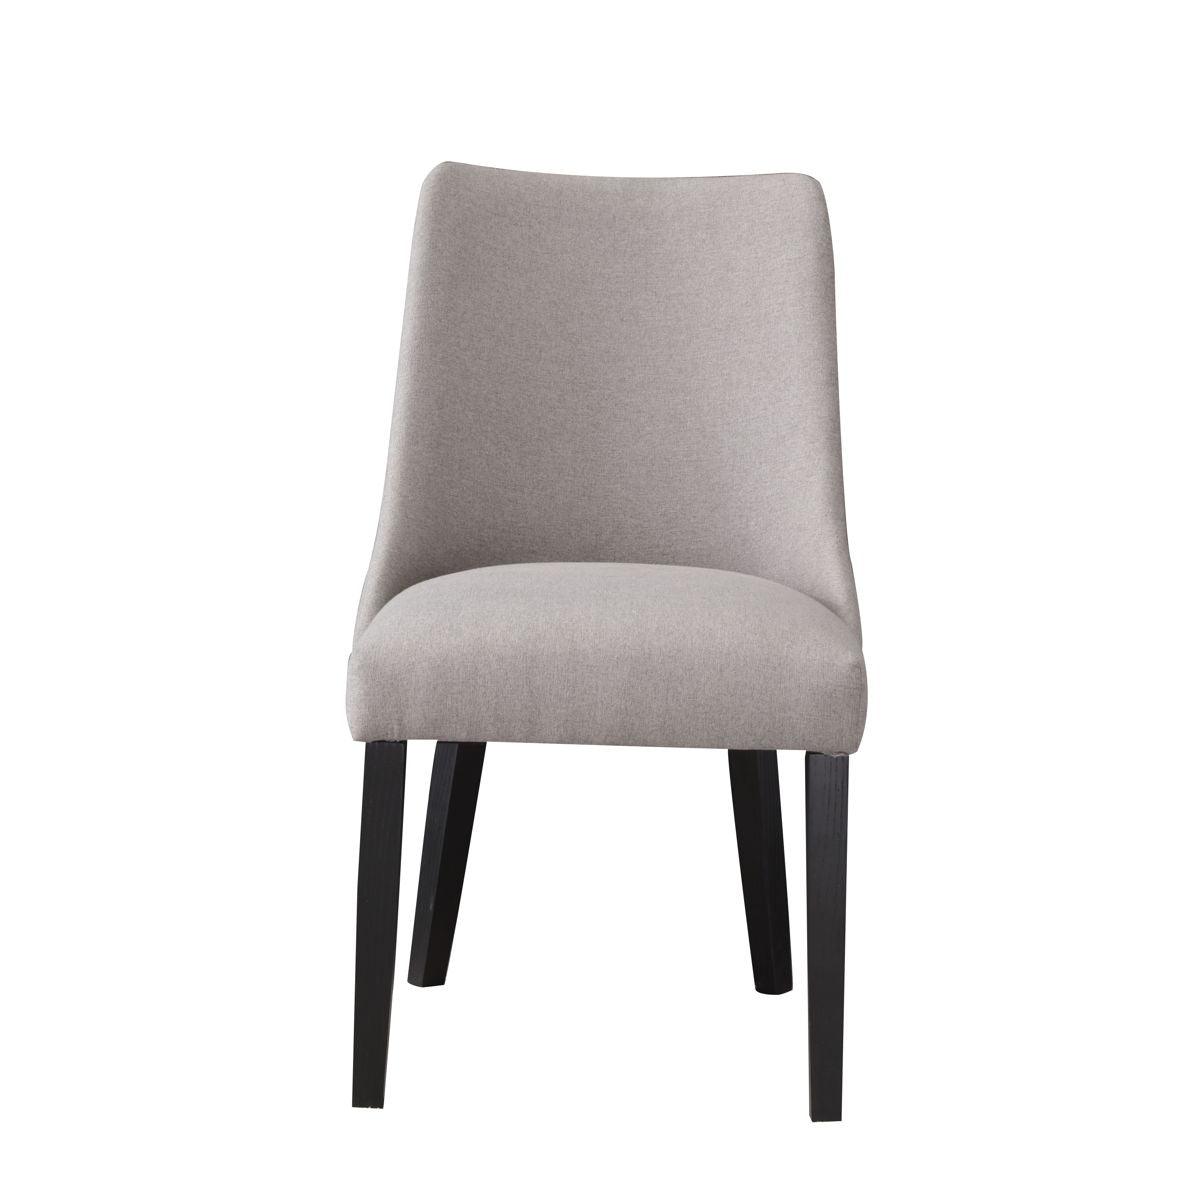 Steve Silver Furniture - Xena - Upholstered Side Chair (Set of 2) - Gray - 5th Avenue Furniture